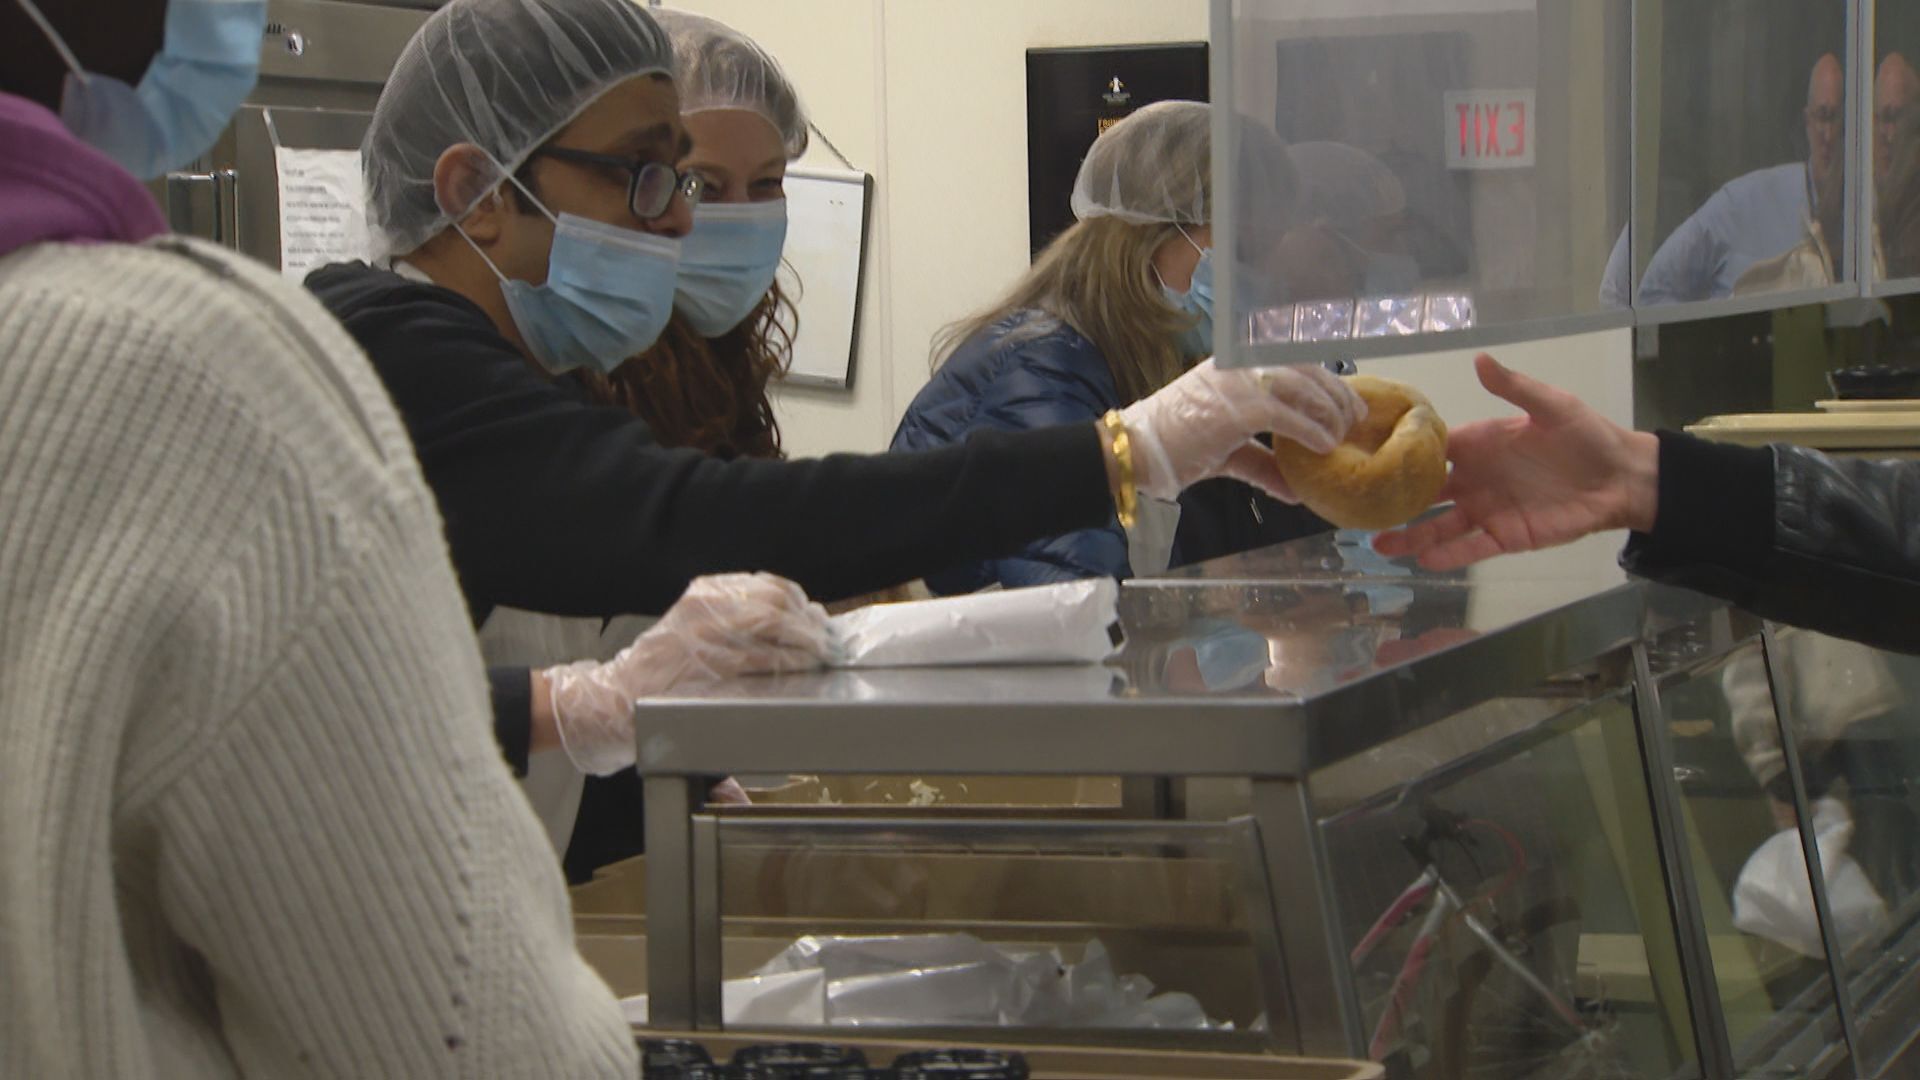 Local charities prepare meals ahead of Easter